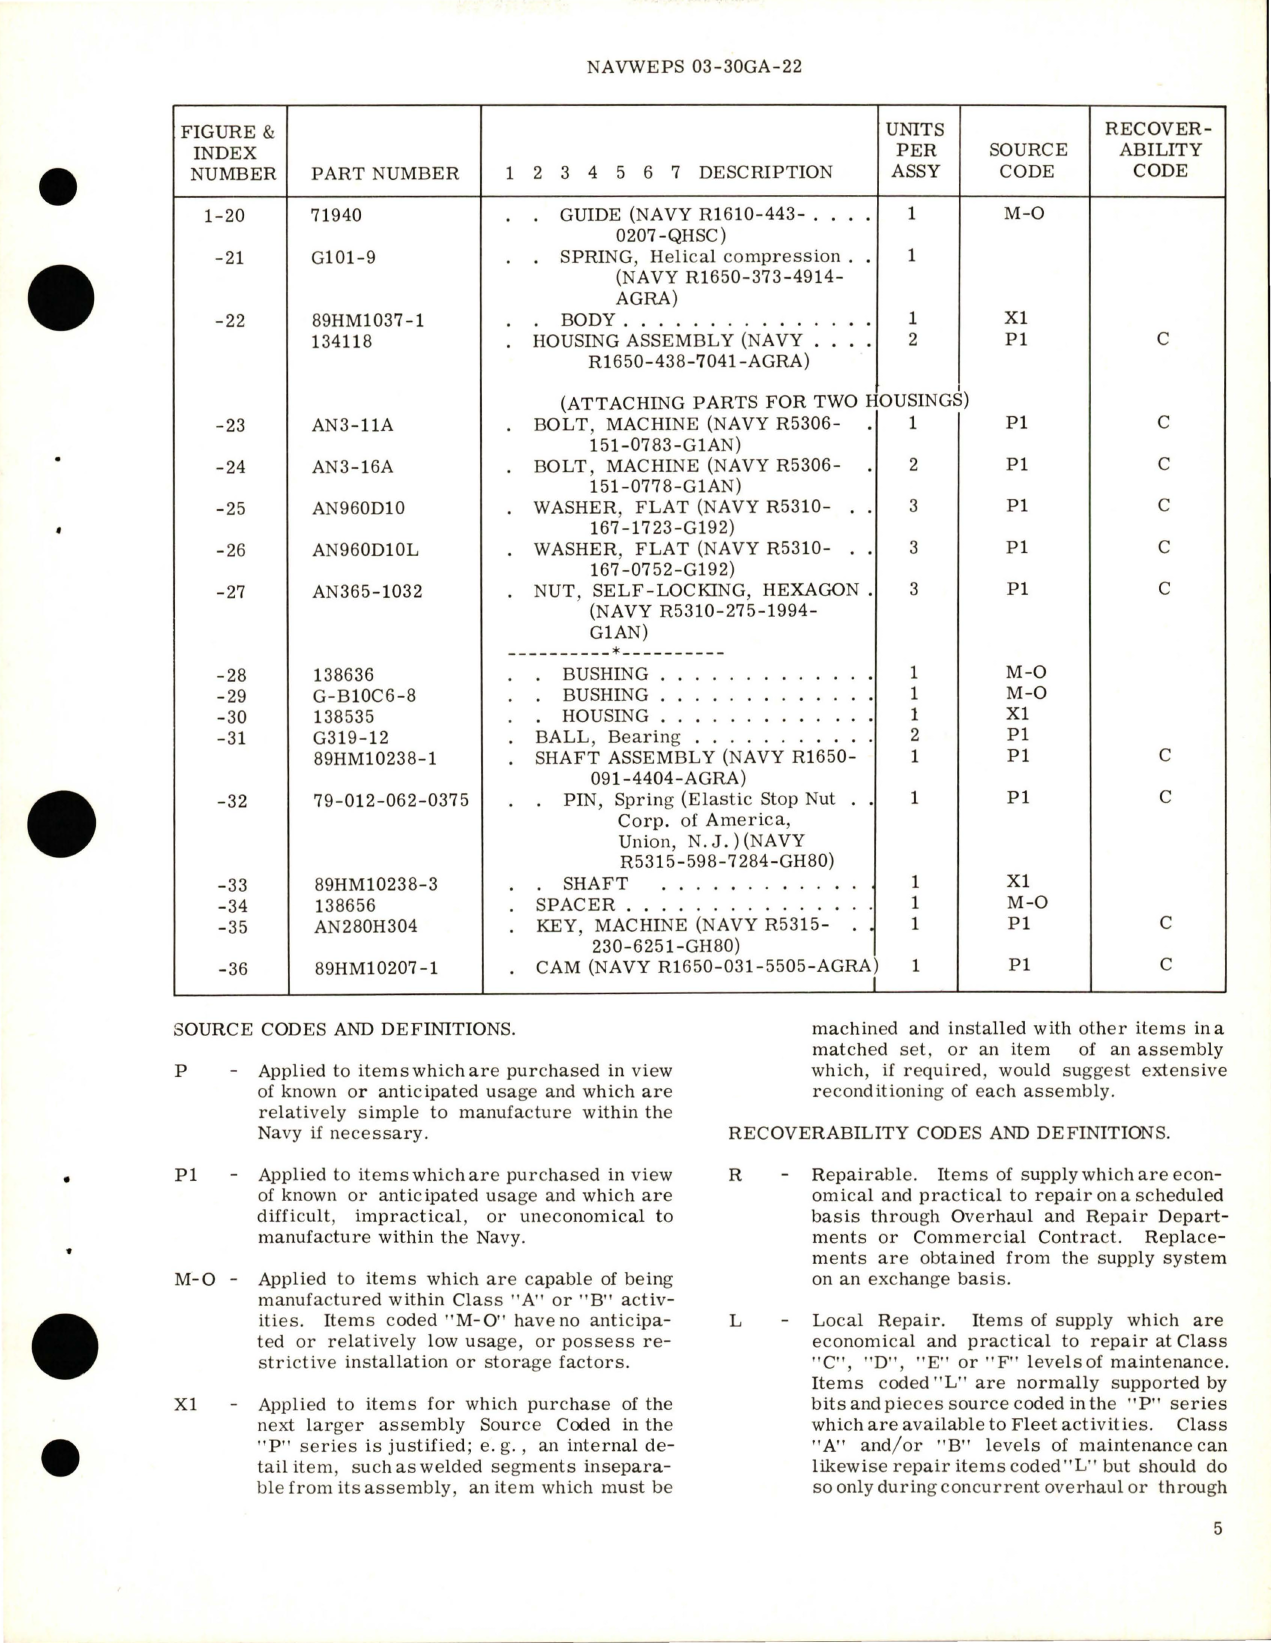 Sample page 5 from AirCorps Library document: Overhaul Instructions with Parts Breakdown for Hydraulic Wing Fold-Timer Check Valve Unit Assembly - 89H1069-1 and 89H1069-3